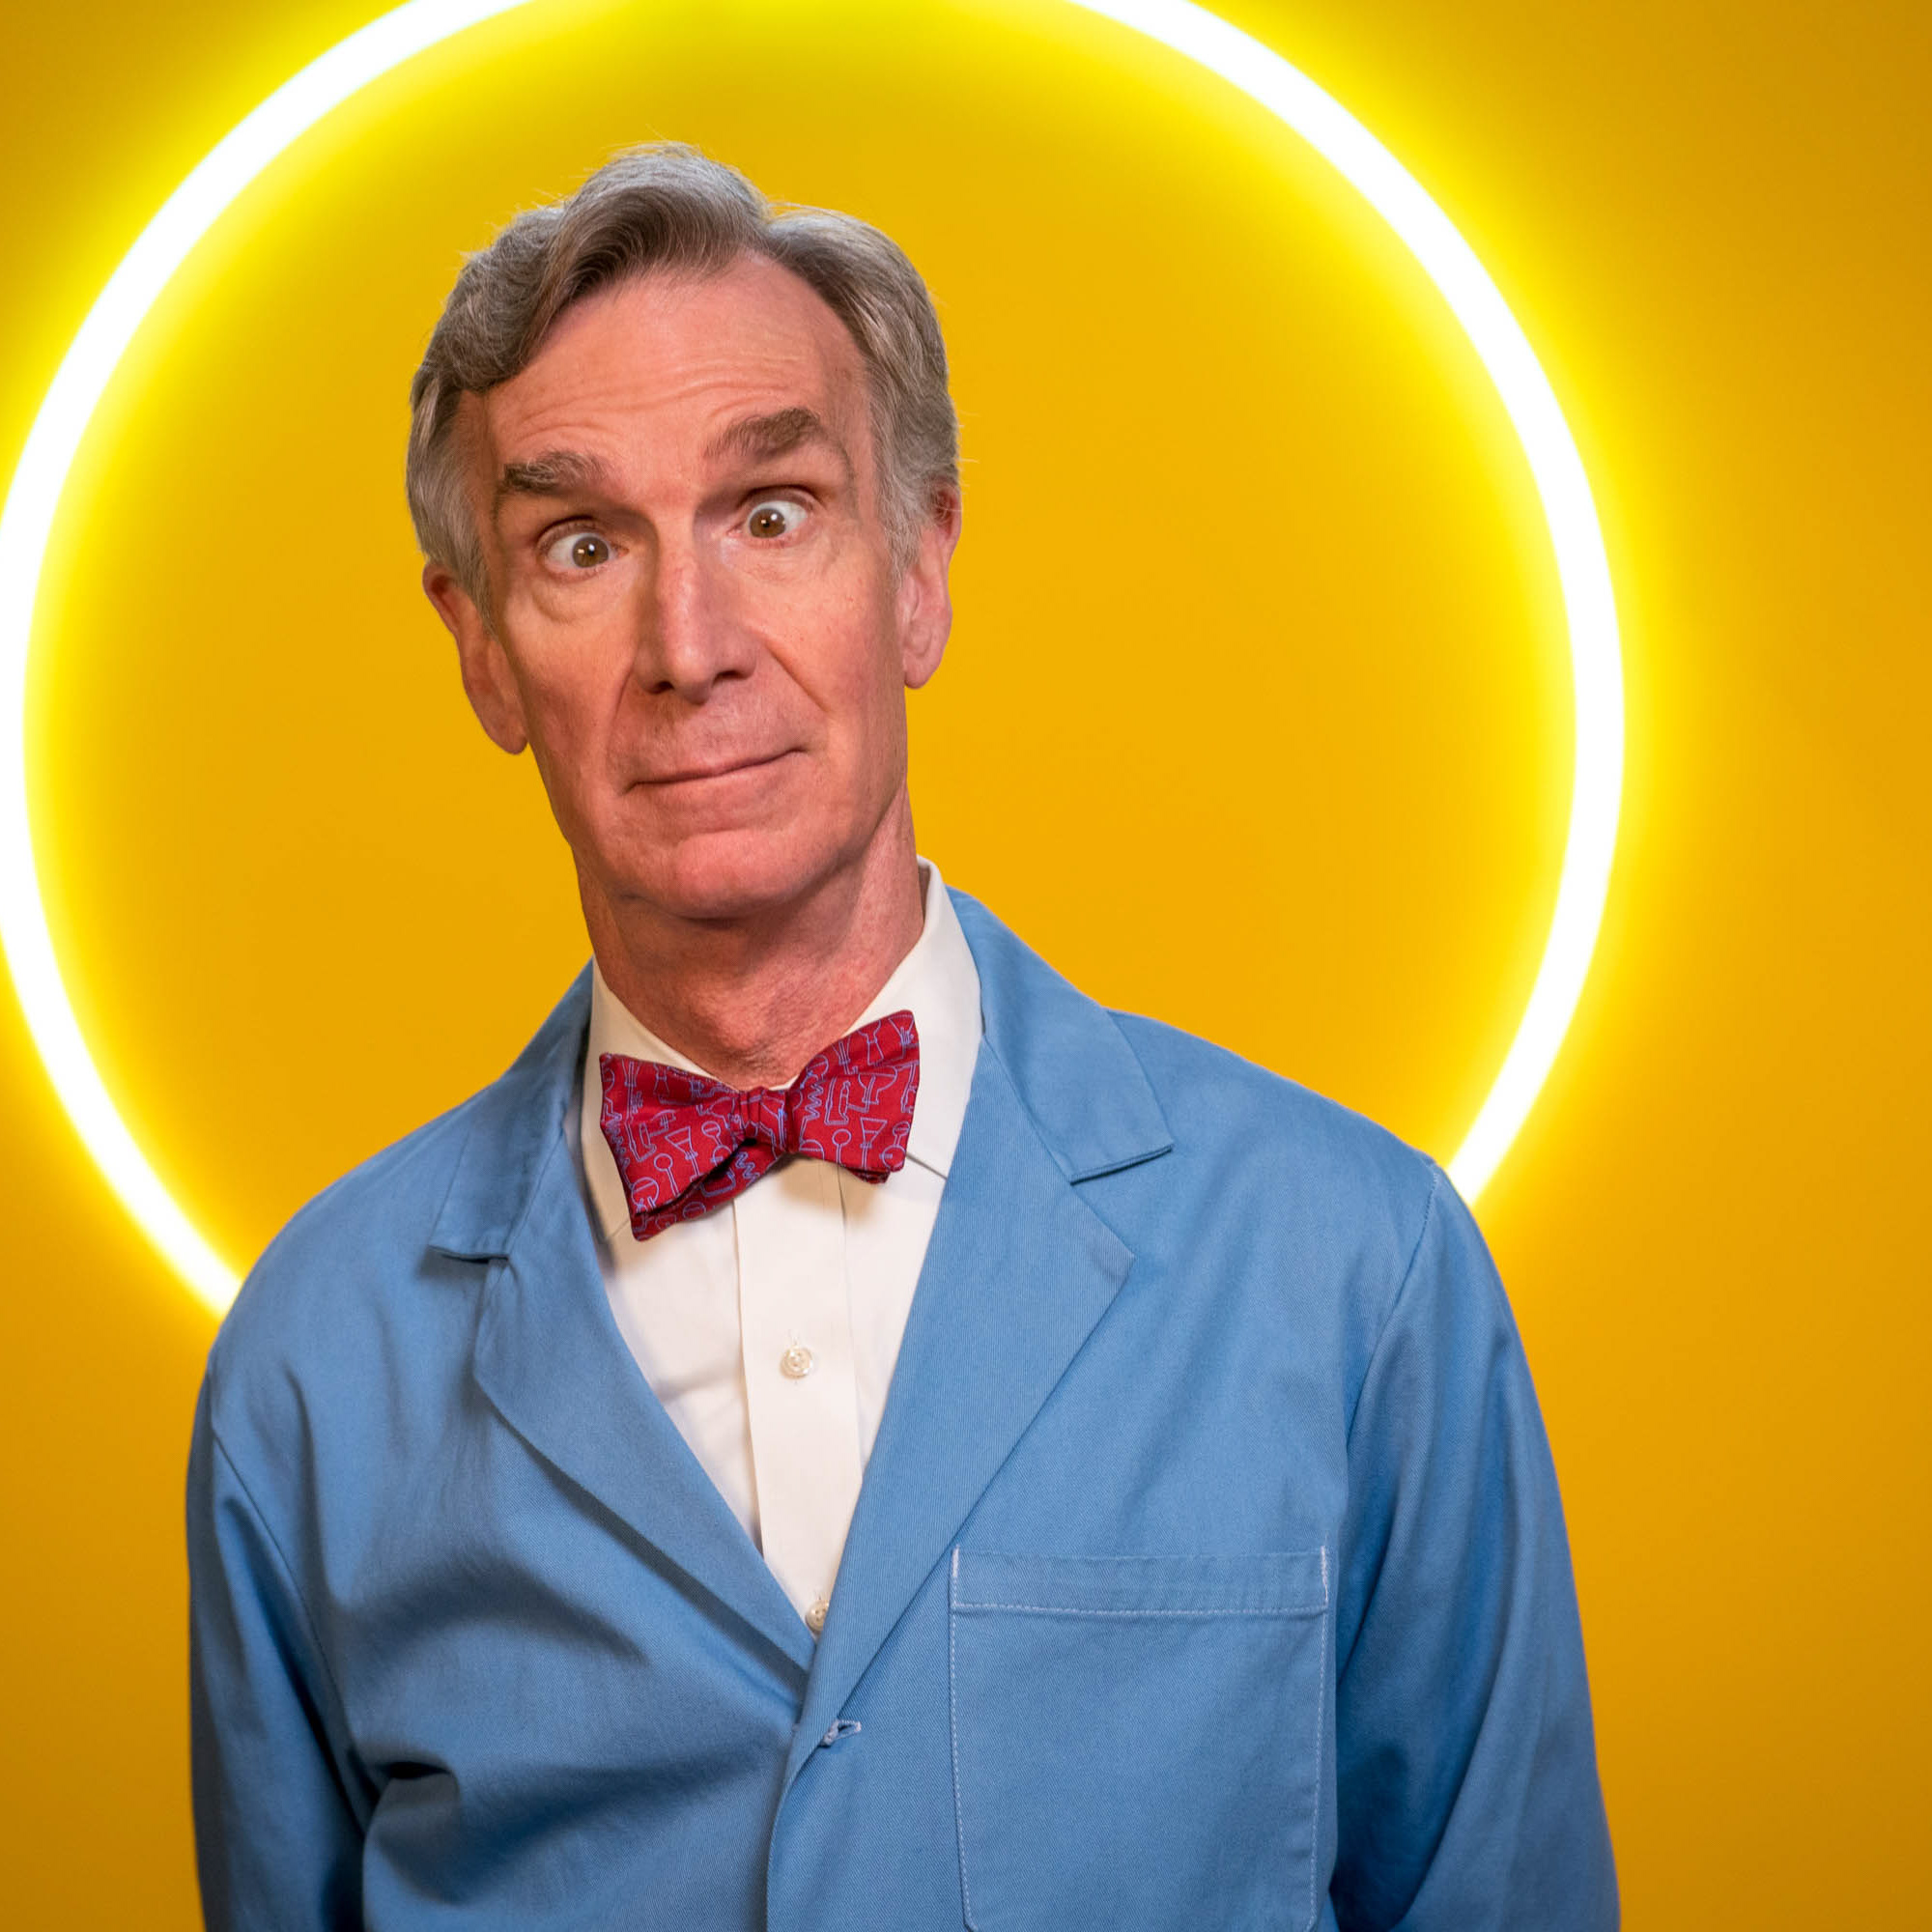 SU 2020/2021 Annual Report - Bill Nye comes to Laurier.